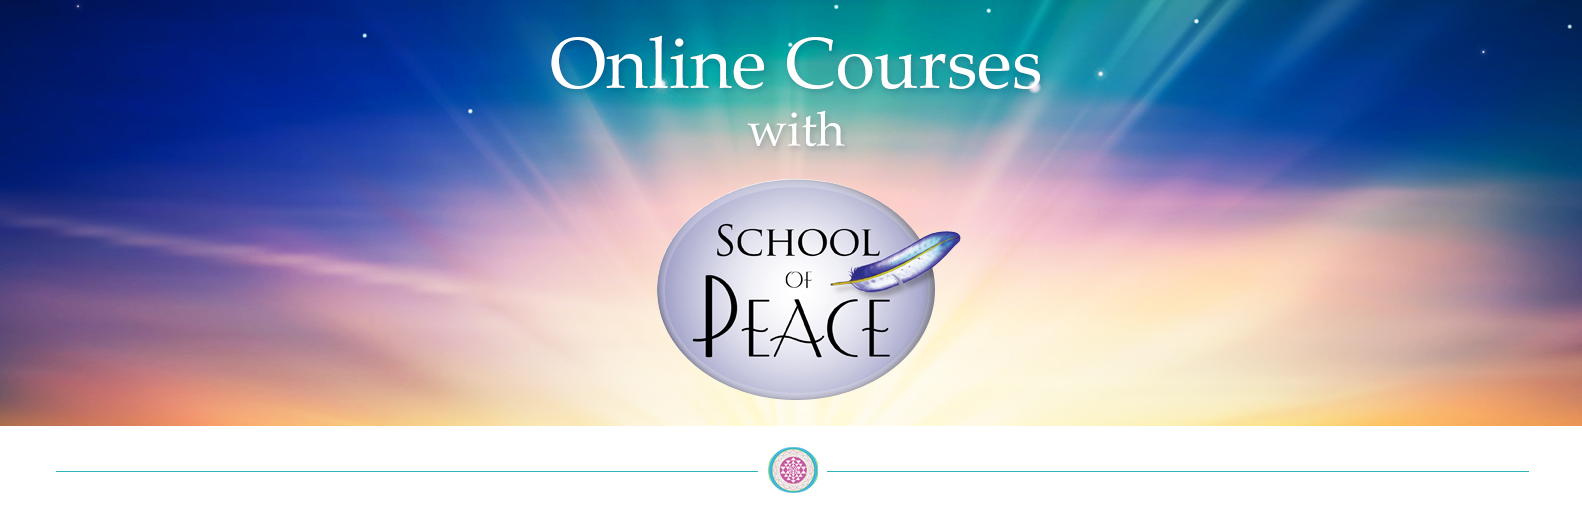 the school of peace online classes